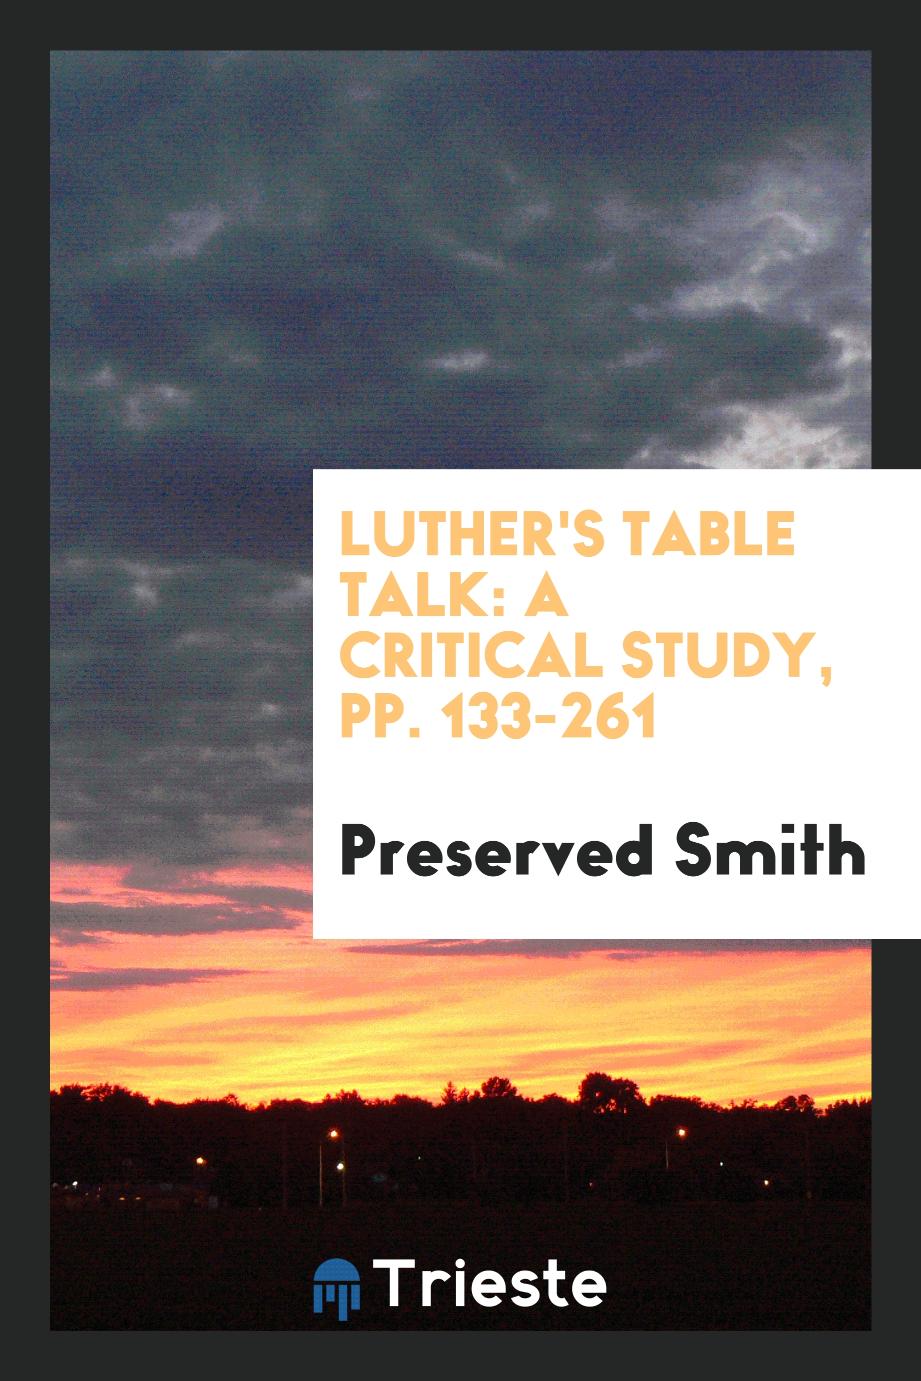 Luther's Table Talk: A Critical Study, pp. 133-261